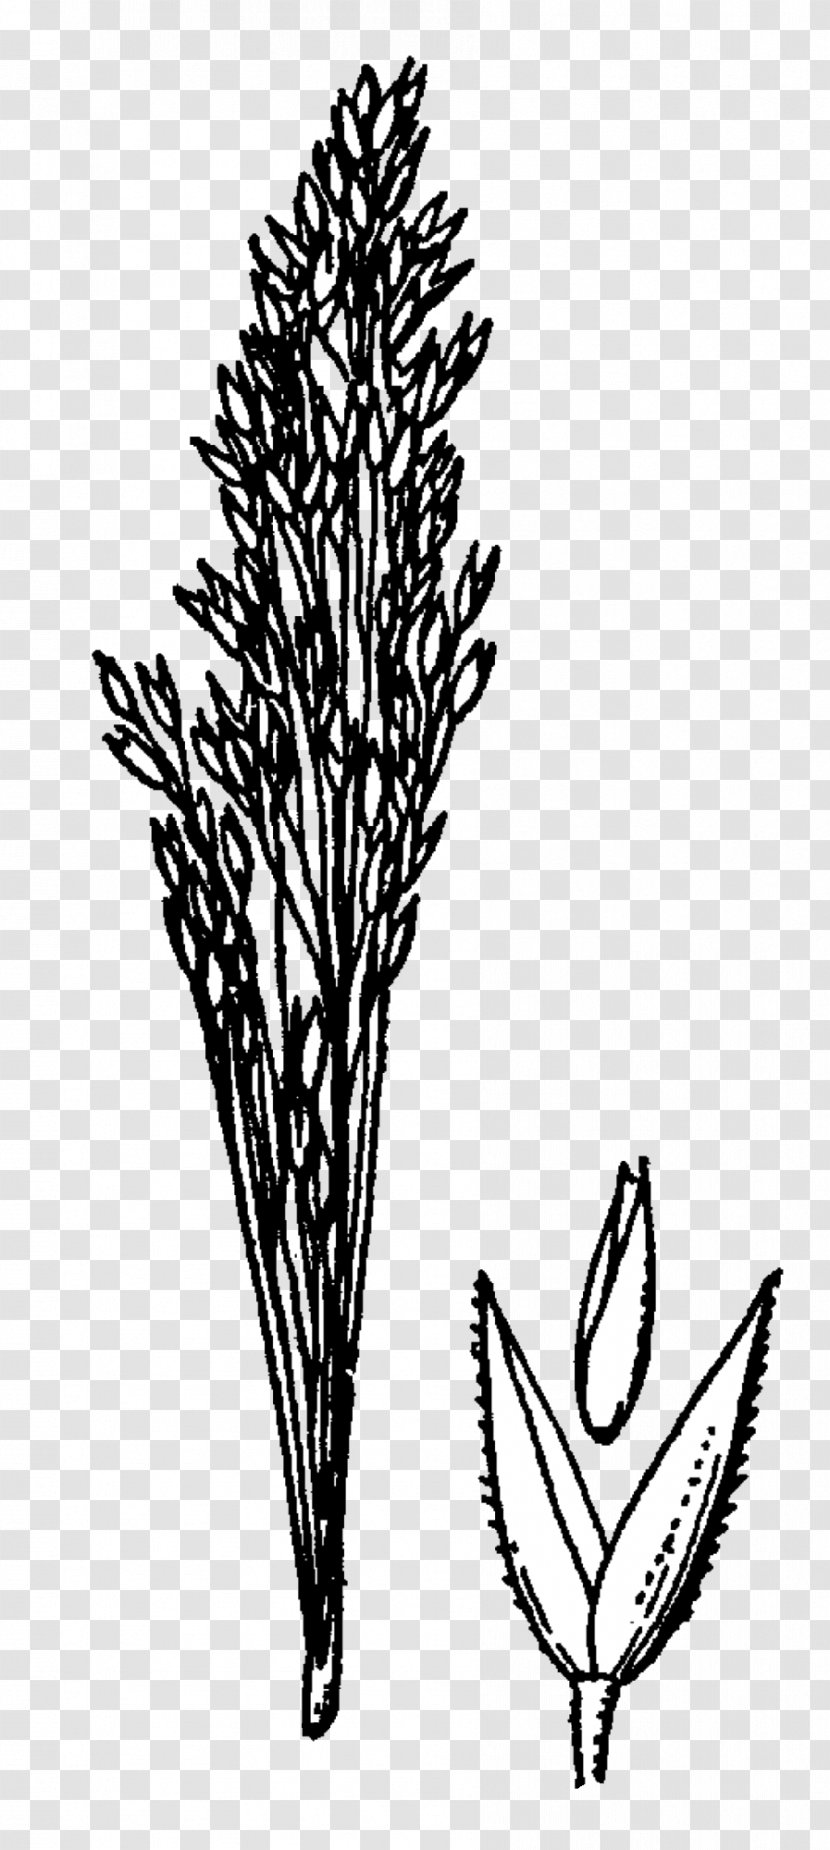 Bentgrass Agrostis Rossiae Manual Of The Grasses United States Monocotyledon Plants - Monochrome Transparent PNG